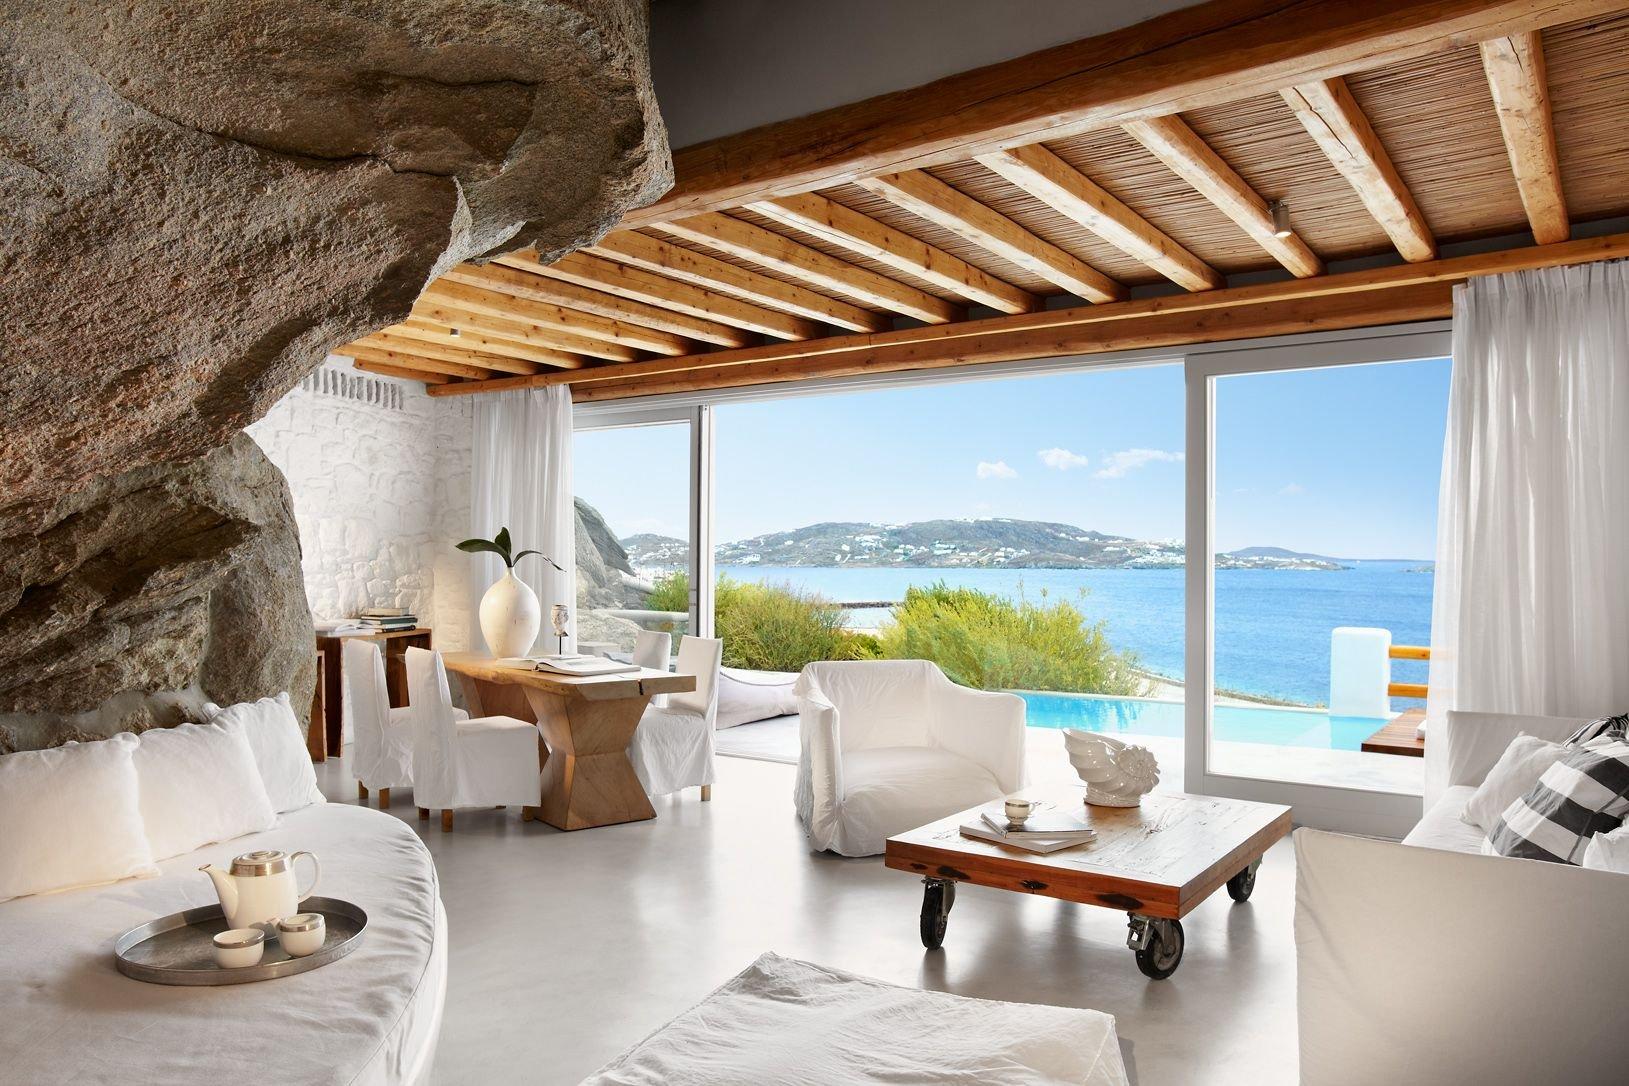 Stay at Cavo Tagoo Mykonos for as low as $664 | HotelsCombined